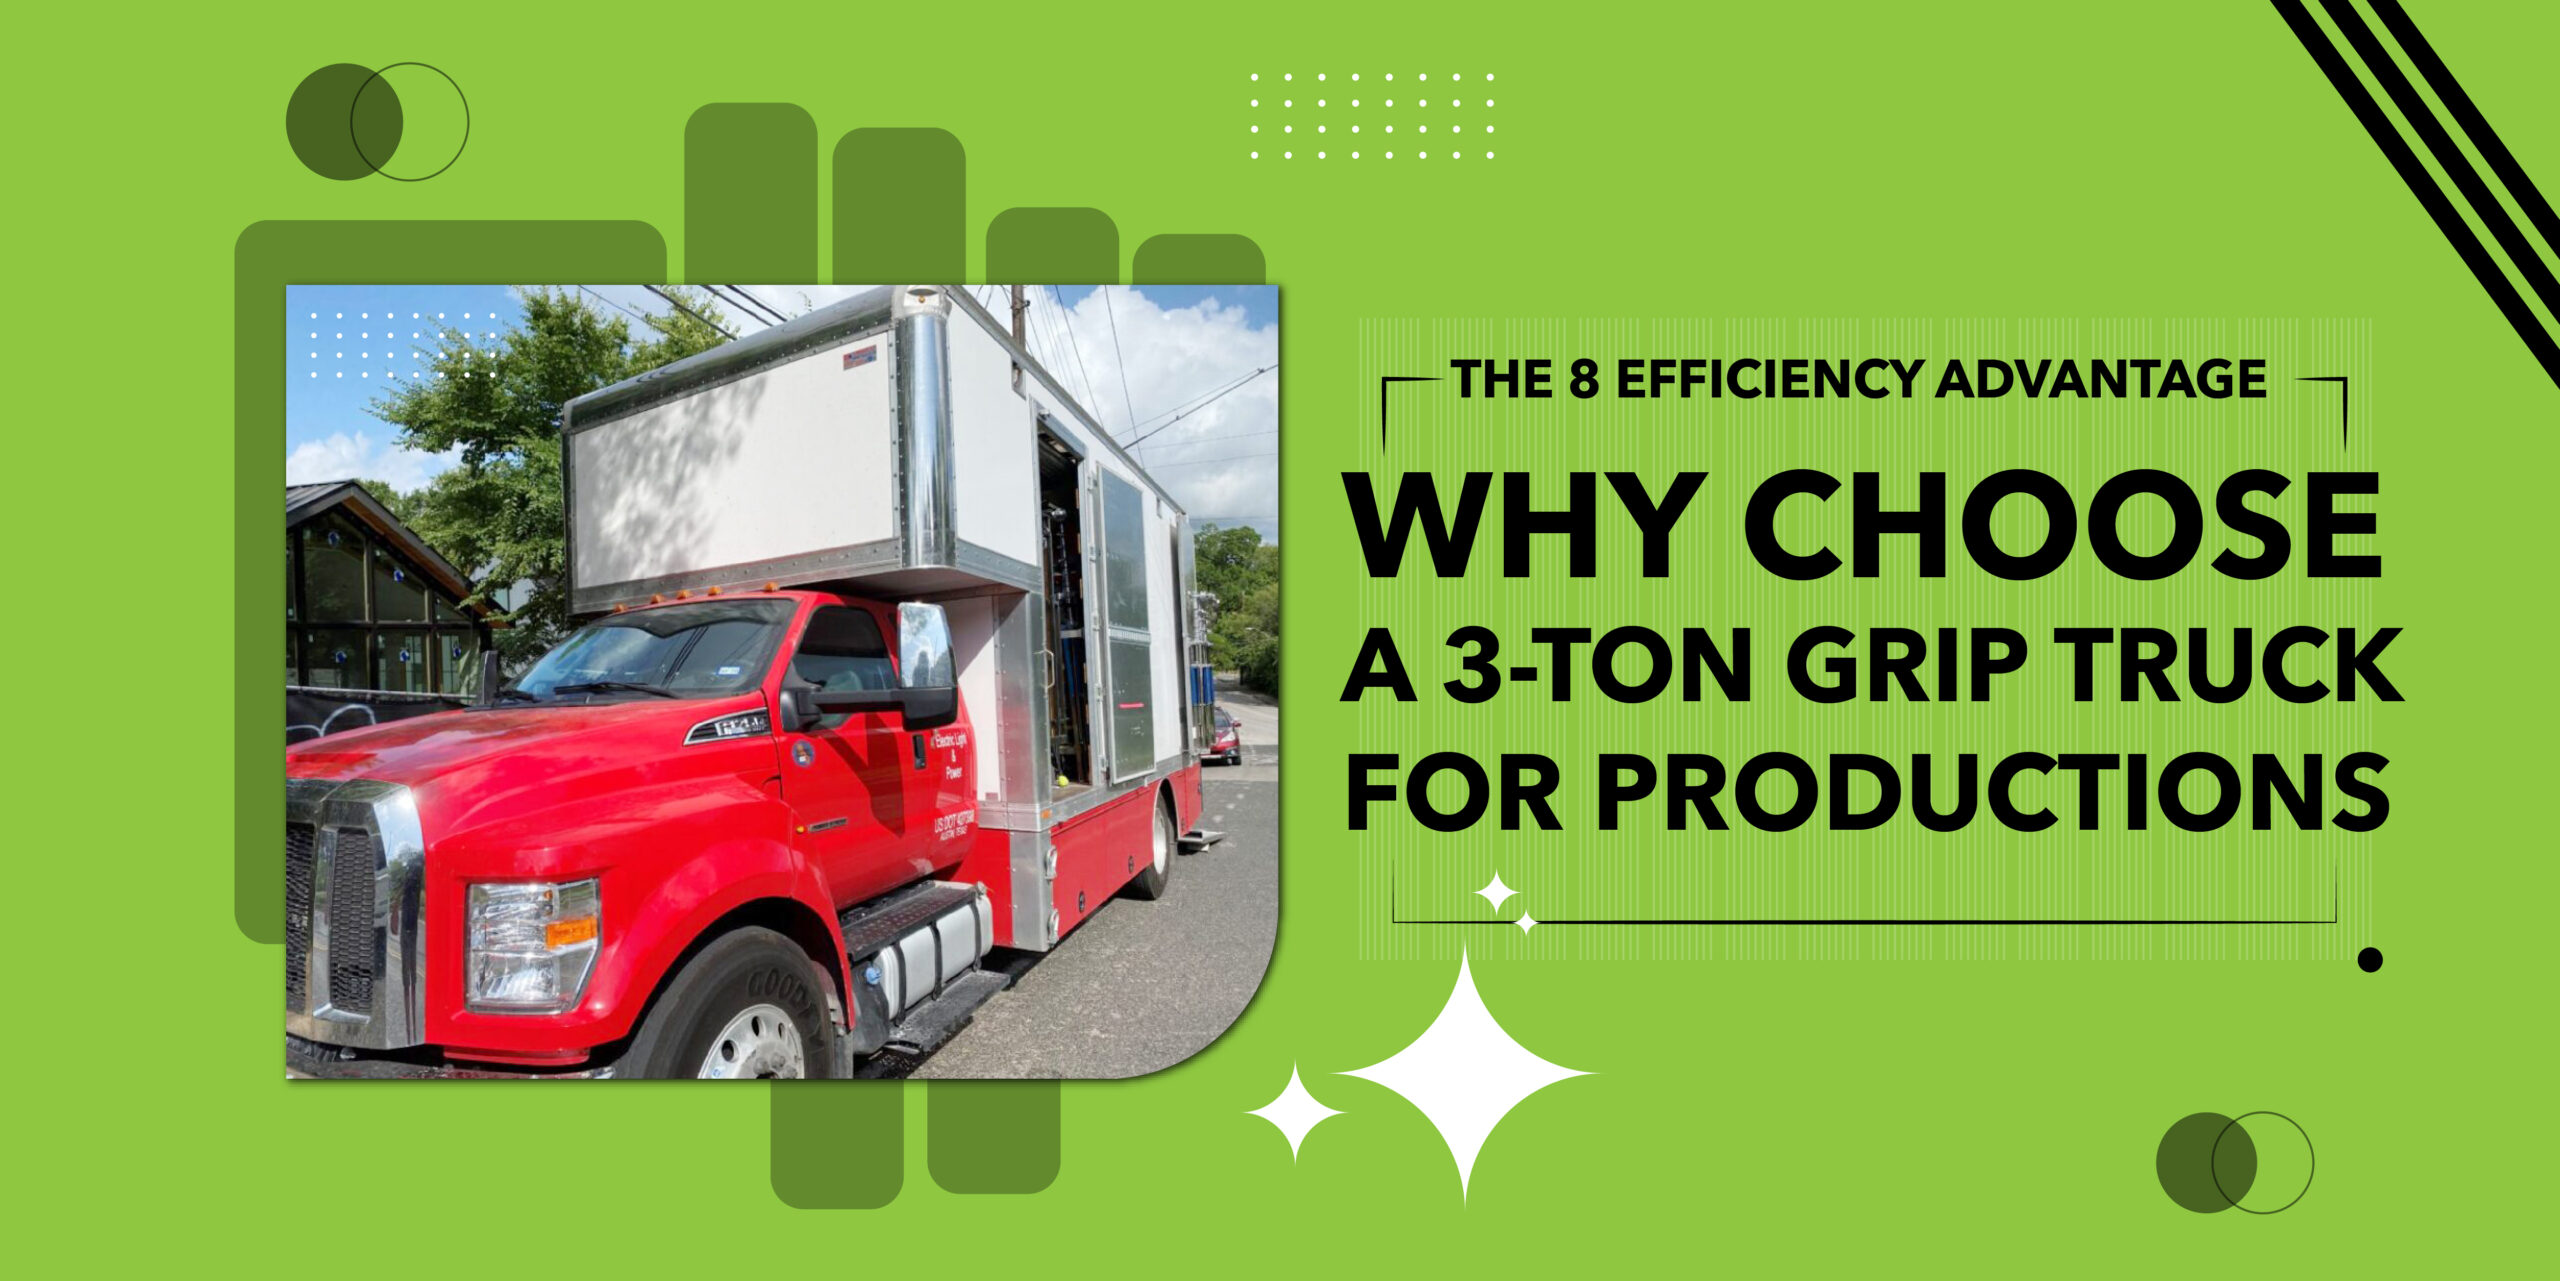 3-Ton Grip Truck for Productions